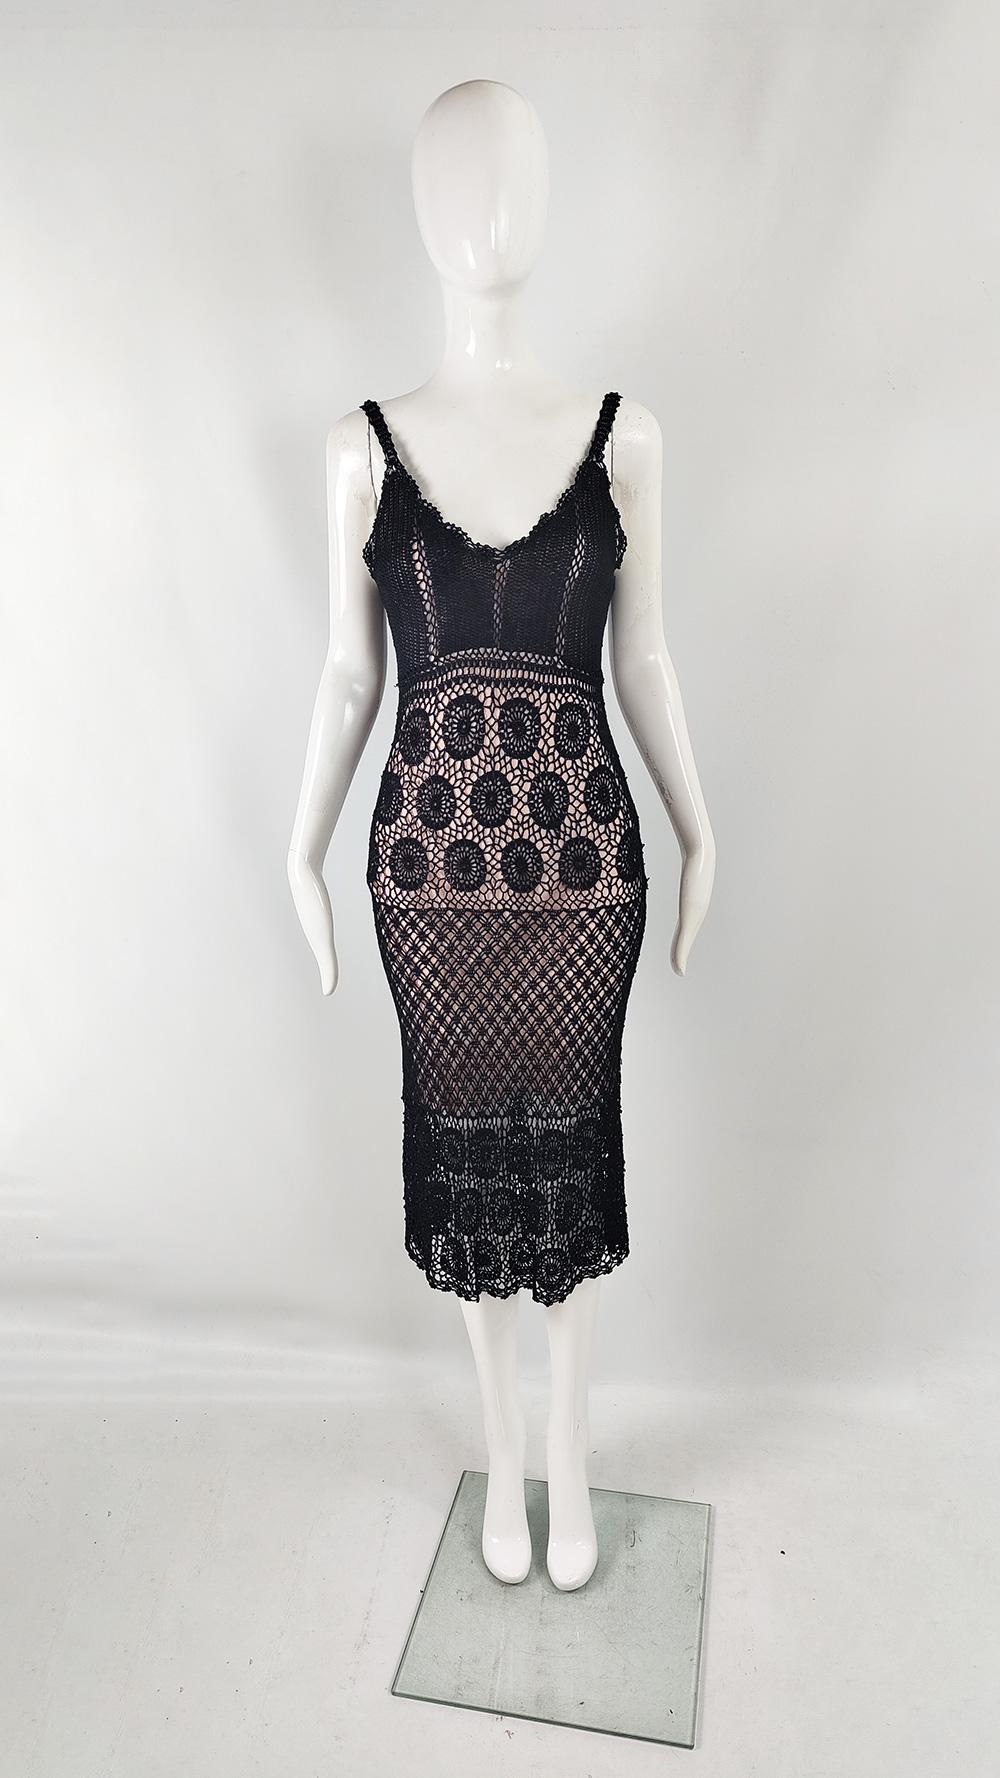 A fabulous vintage womens dress from the late 90s / early 2000s by luxury British fashion designer, Ronit Zilkha. In a black open knit crochet with a pink underlining. The straps and hem are dotted with beading adding a luxe feel. Perfect for a